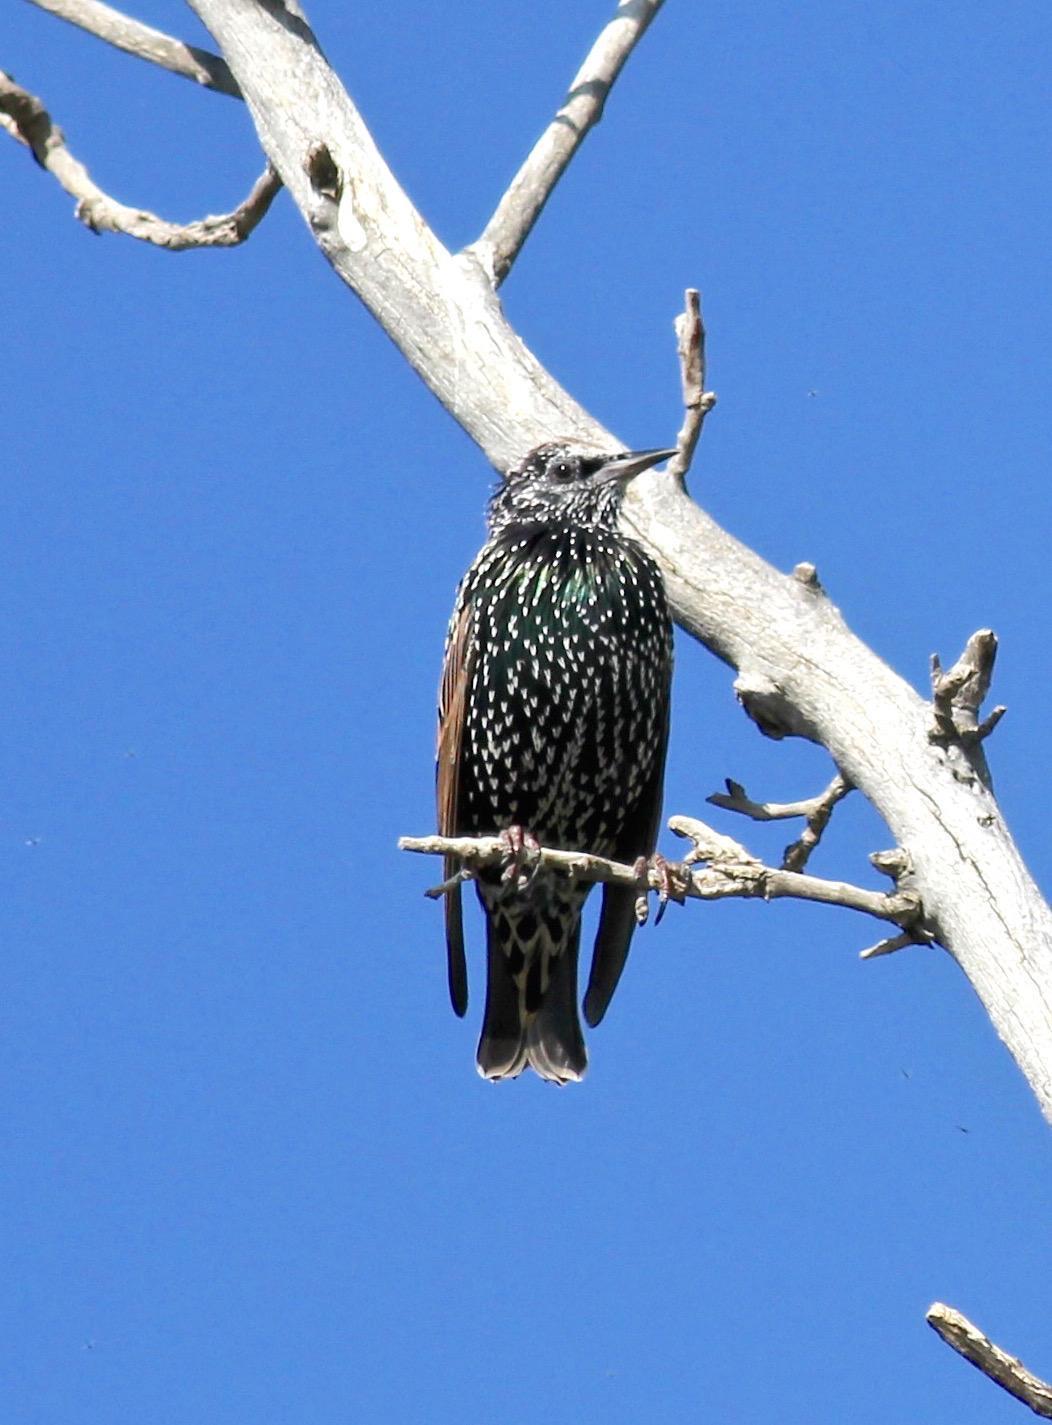 European Starling Photo by Kathryn Keith